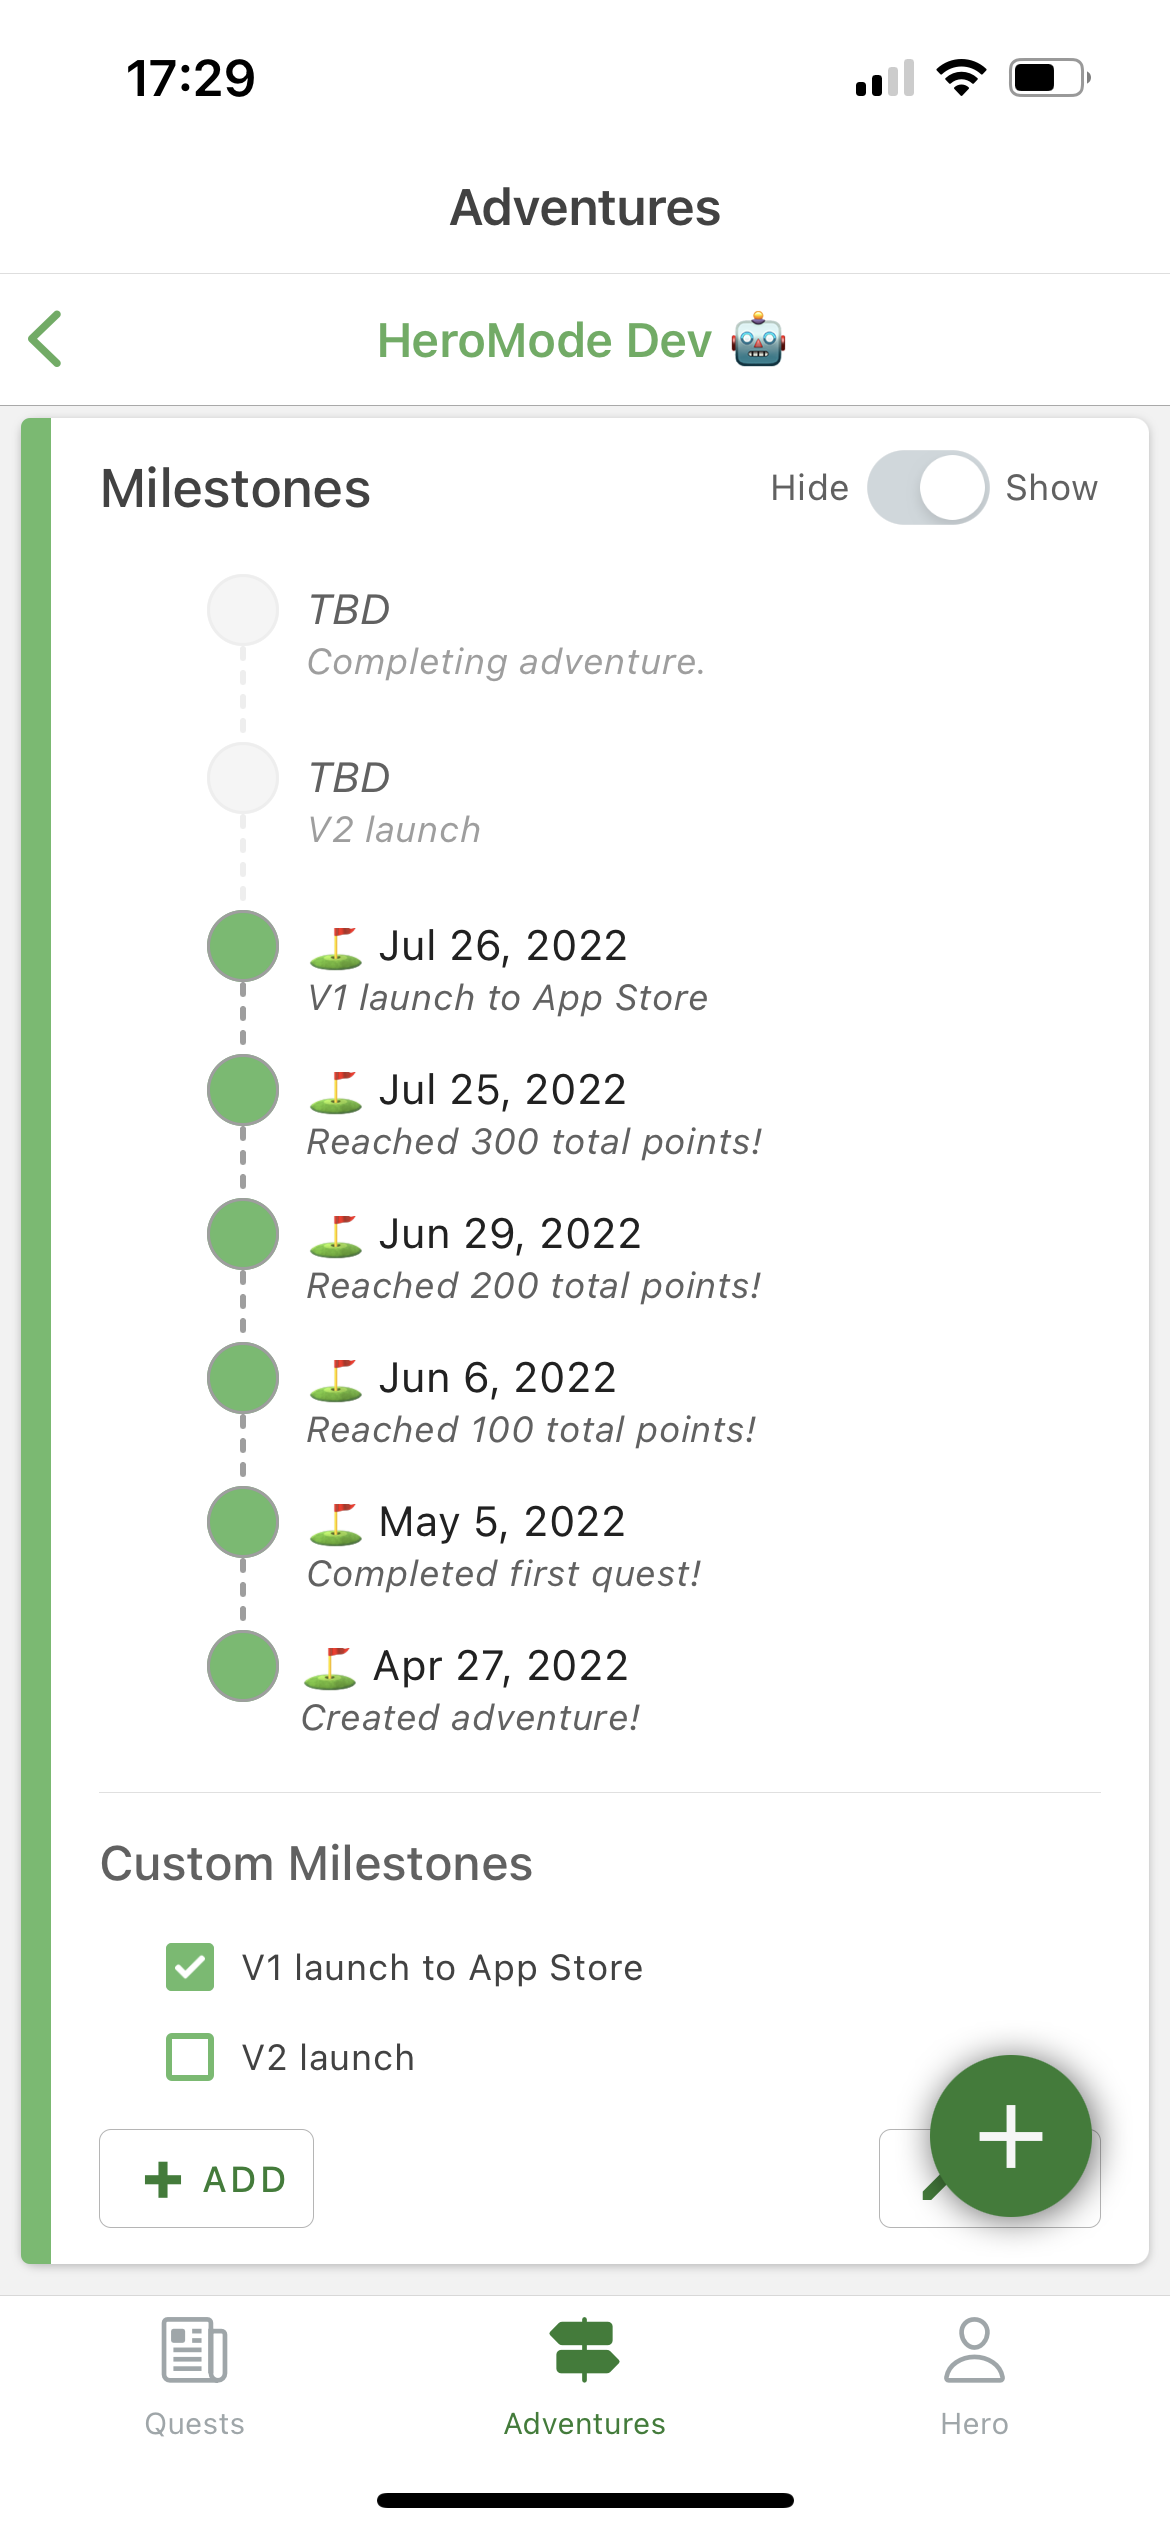 heromode has adventure milestones that can be used for setting goals for your projects